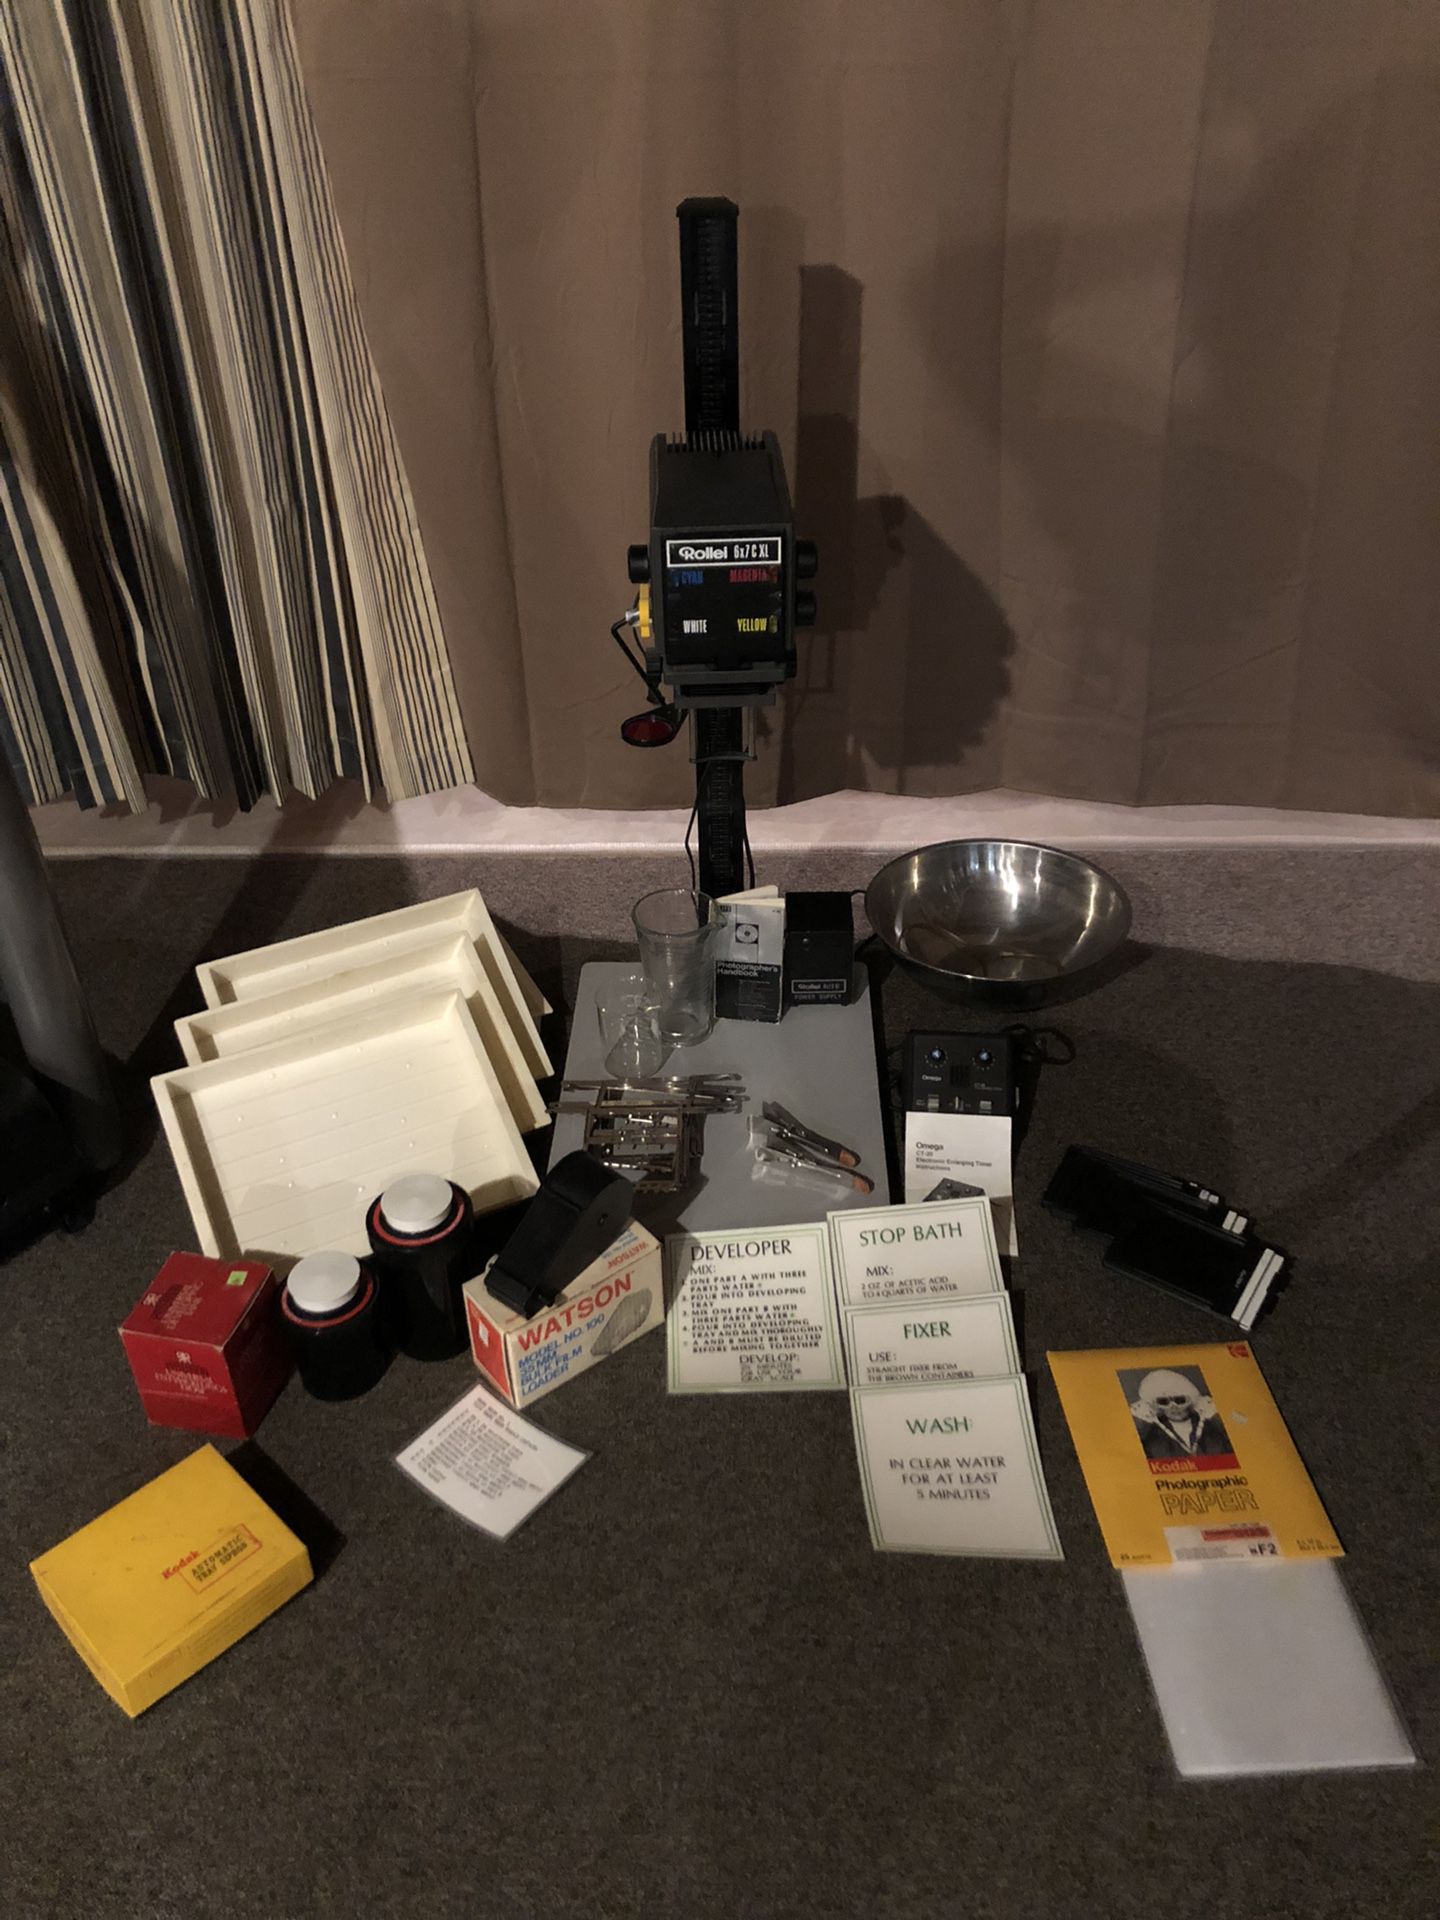 Rollei Darkroom Developing Equipment/Color Photo Enlarger And Equipment